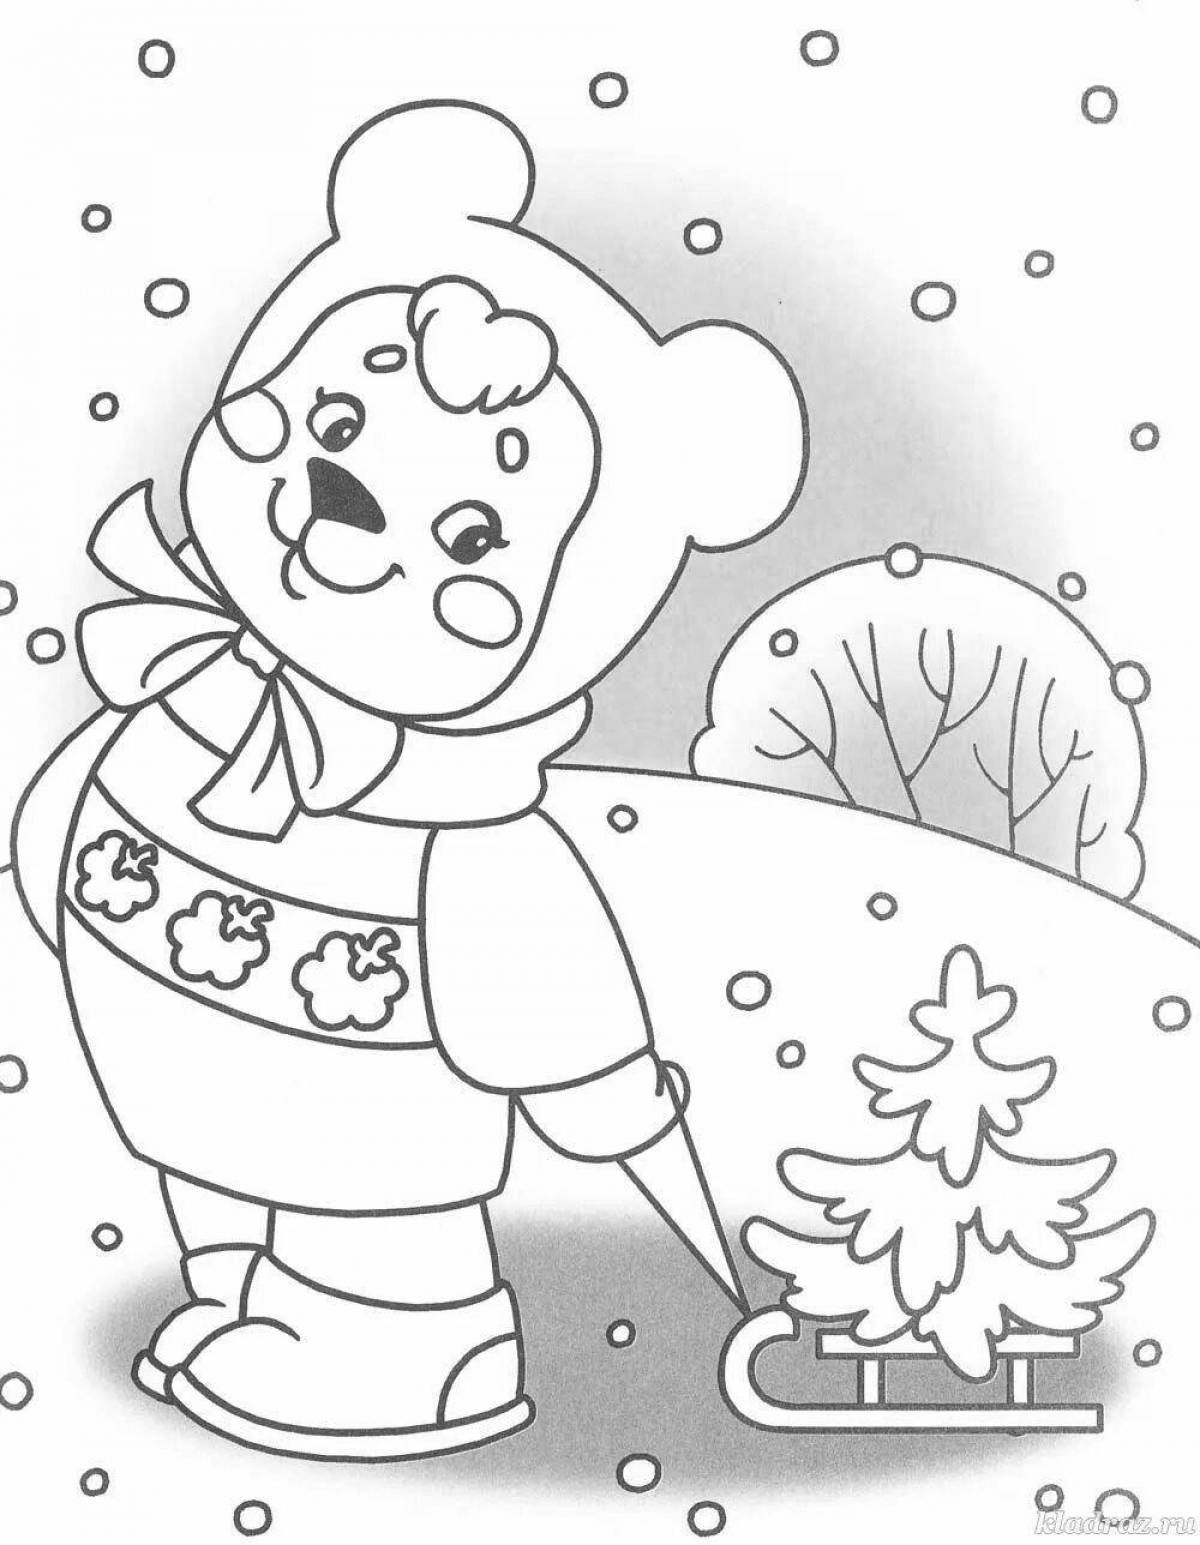 Whimsical winter coloring book for 3-4 year olds